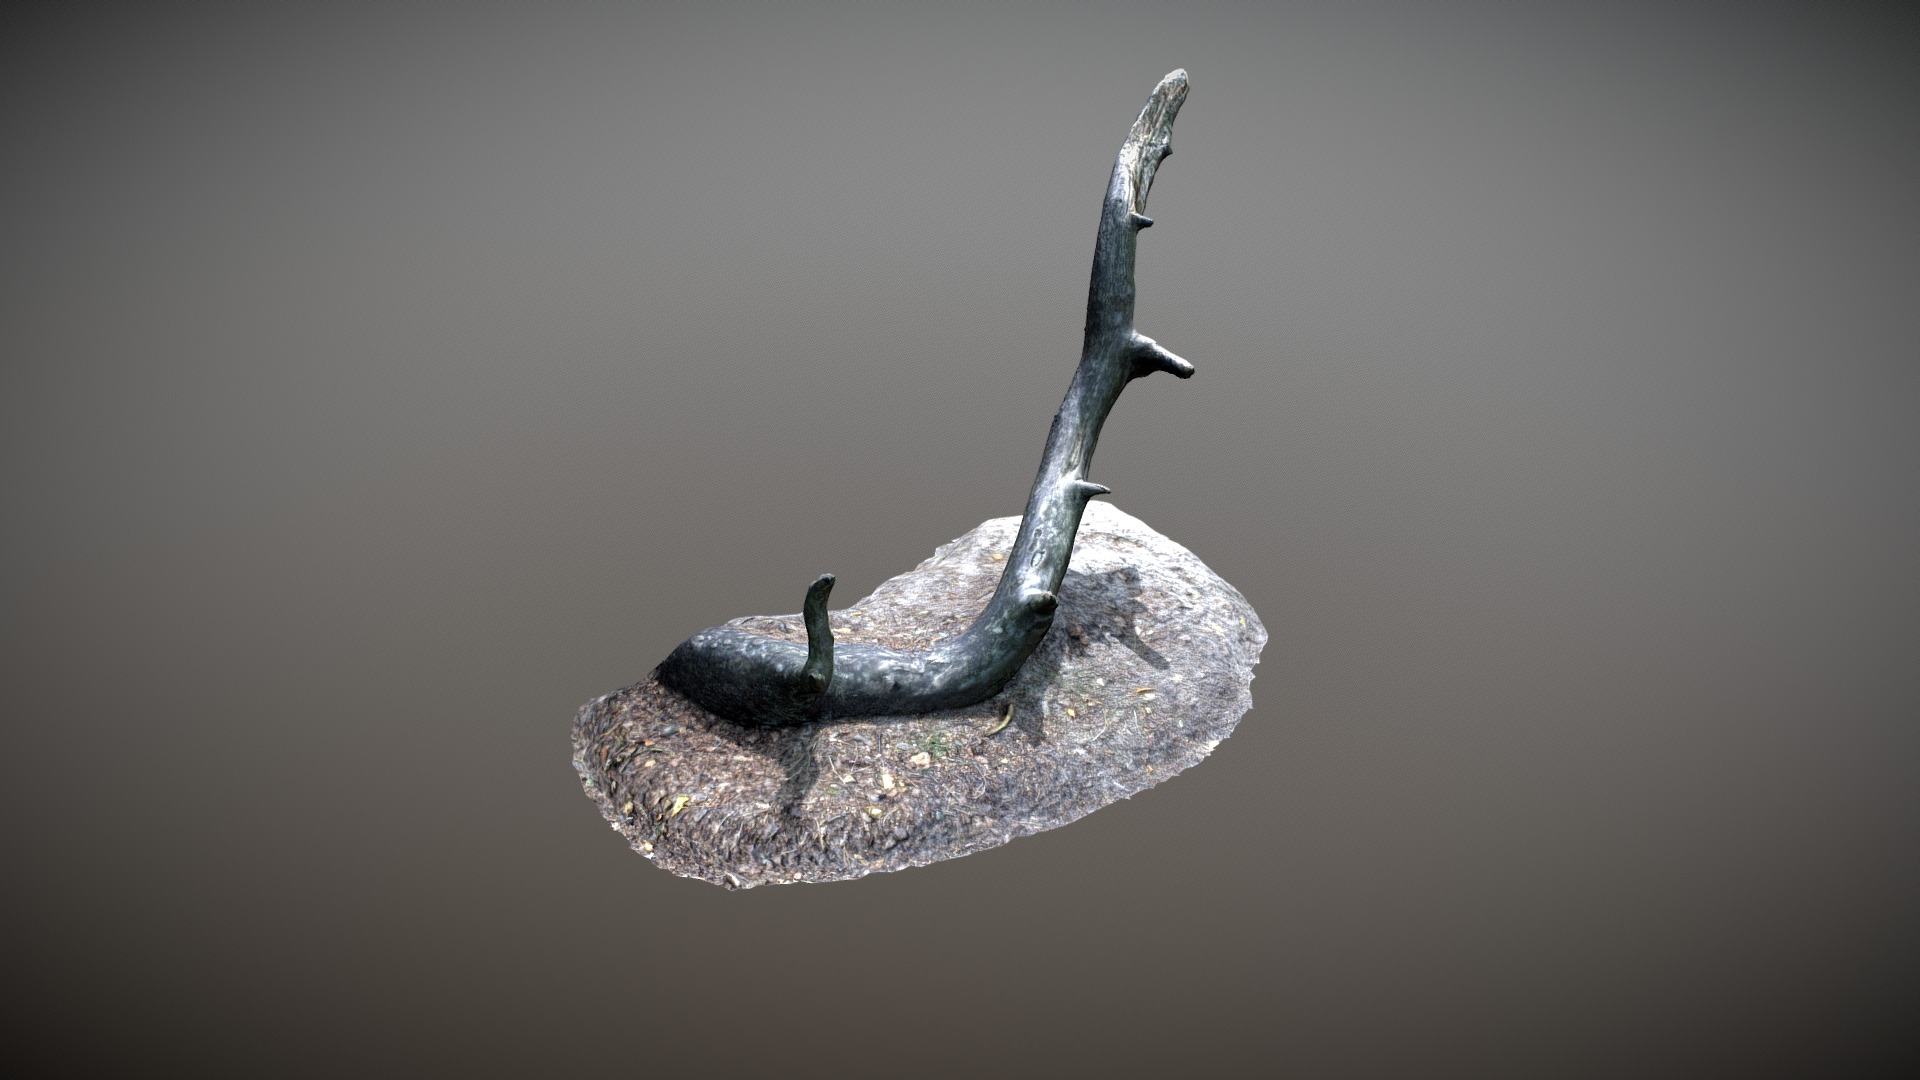 3D model Nature Forest Roots 004 - This is a 3D model of the Nature Forest Roots 004. The 3D model is about a drop of water falling into a rock.